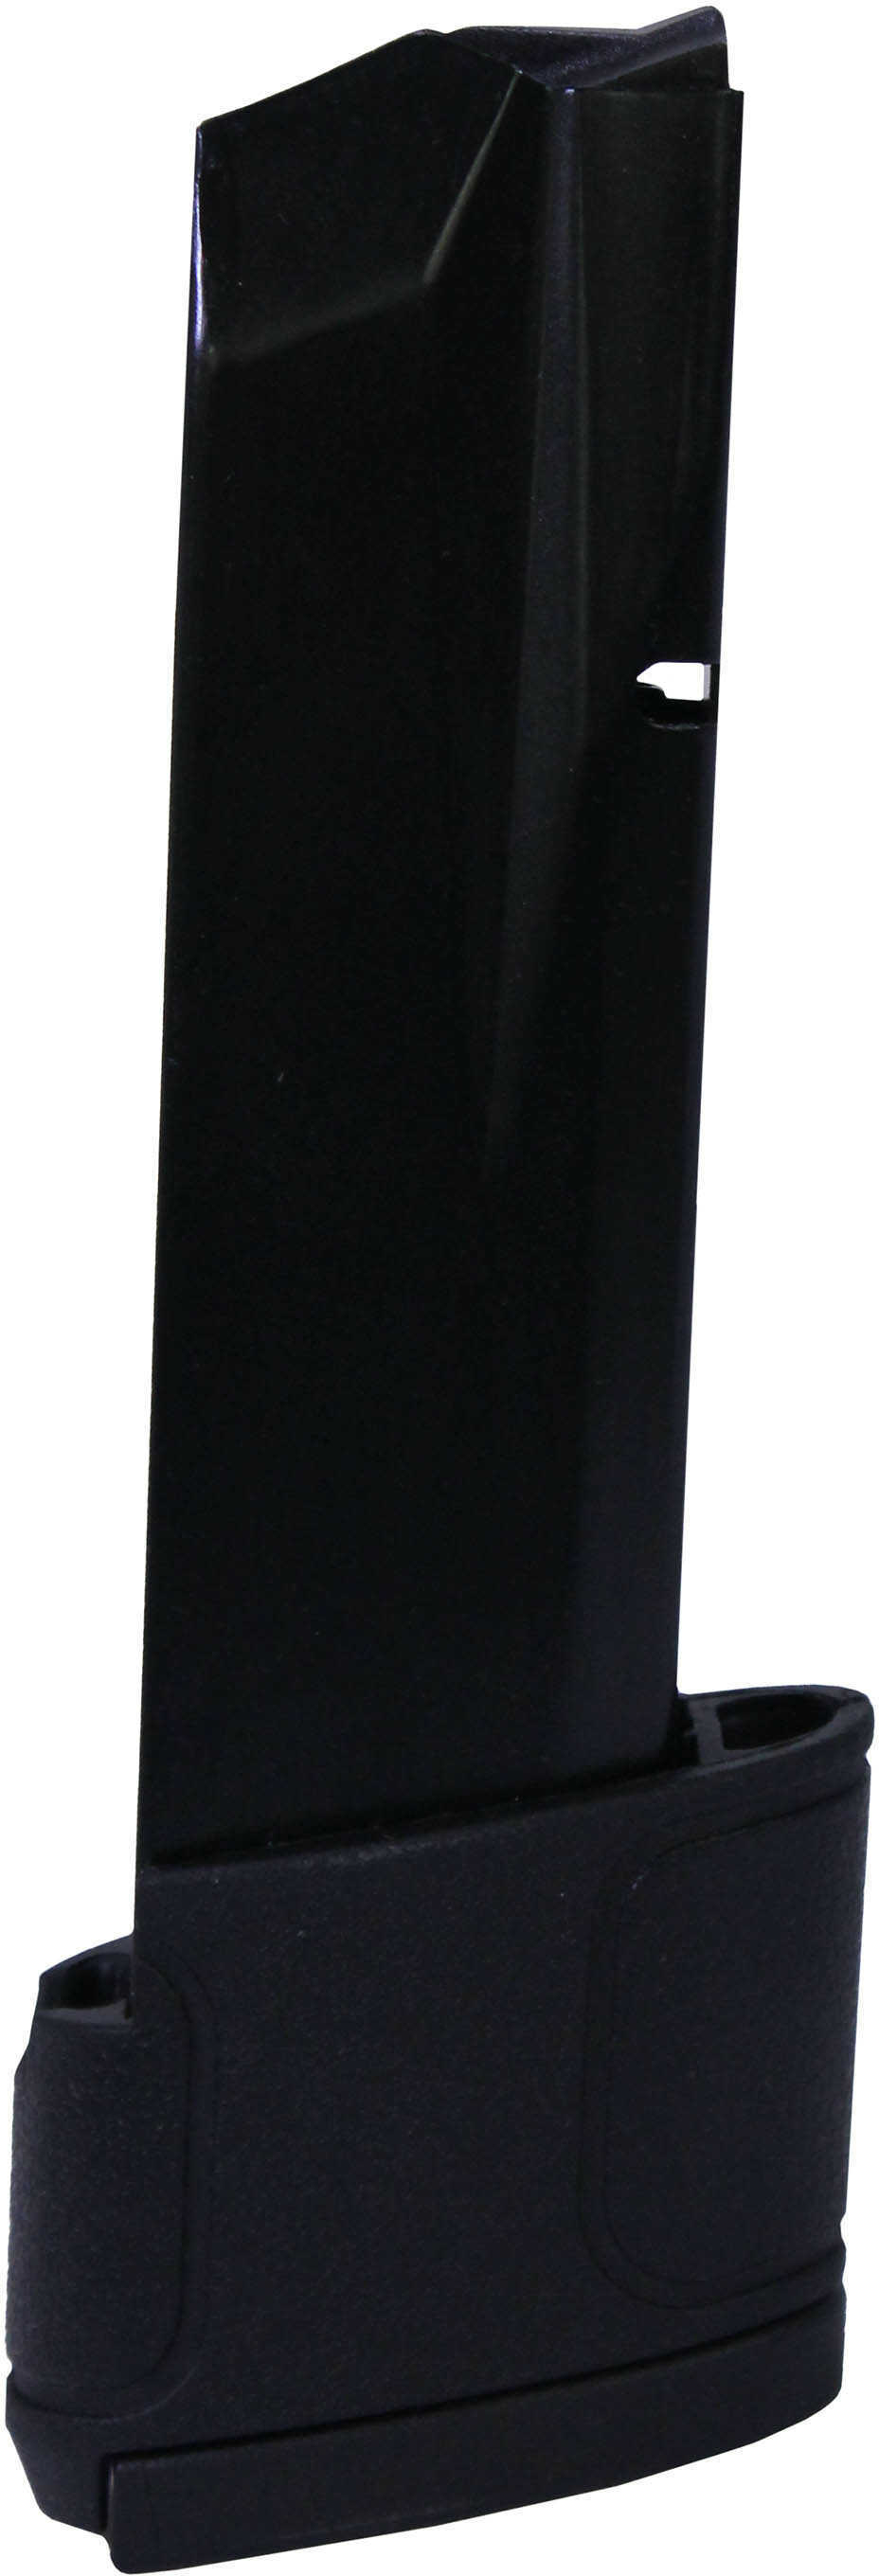 ProMag Smith & Wesson M&P Magazine .45 ACP , 13 Rounds, Blue Steel Md: SMI-A16